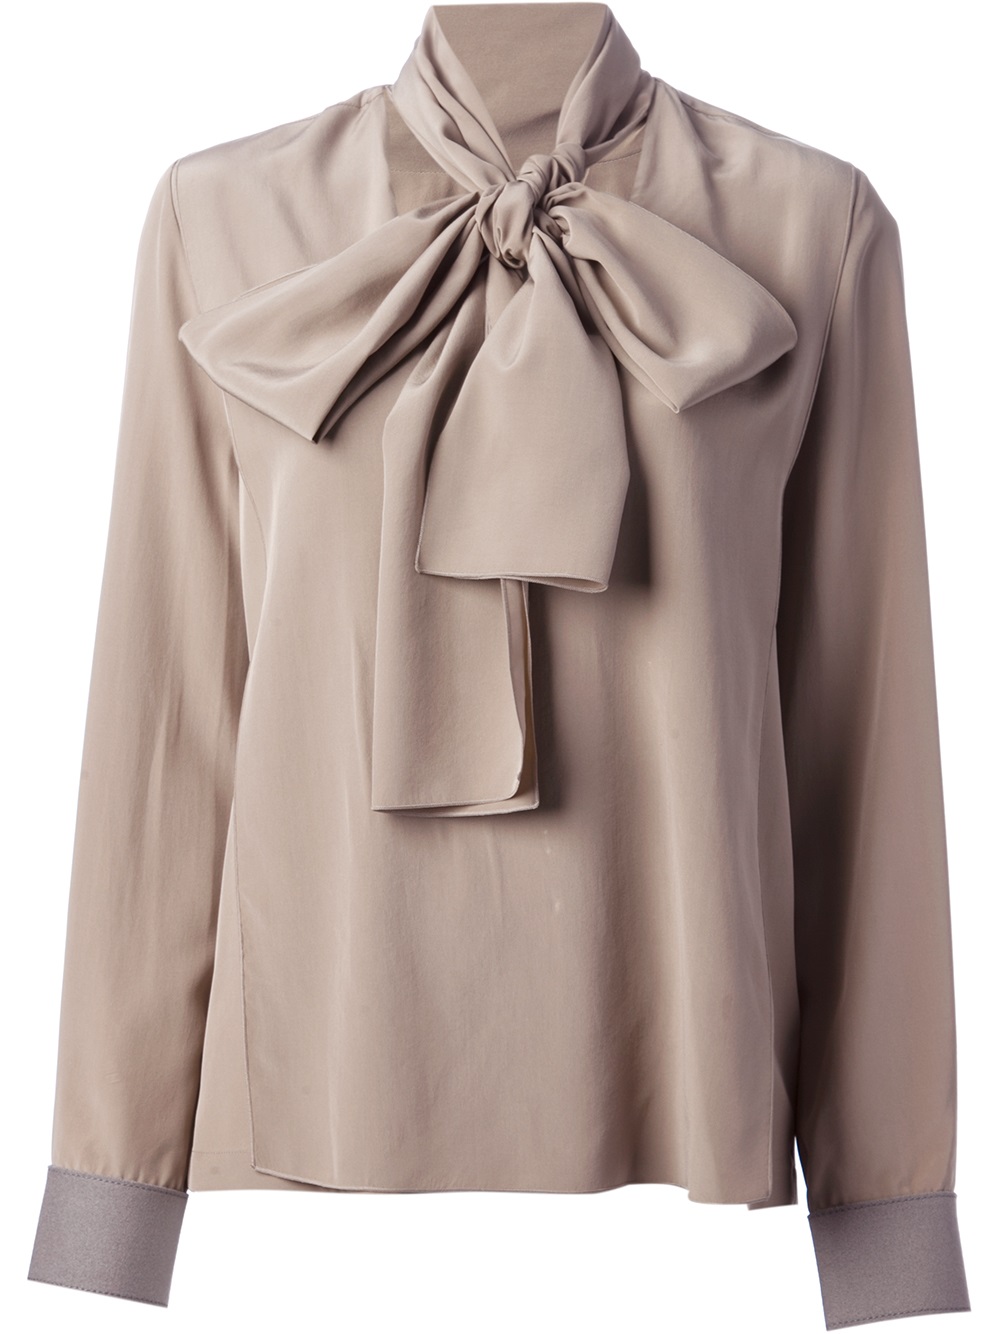 Victoria Beckham Pussy Bow Blouse in Gray | Lyst